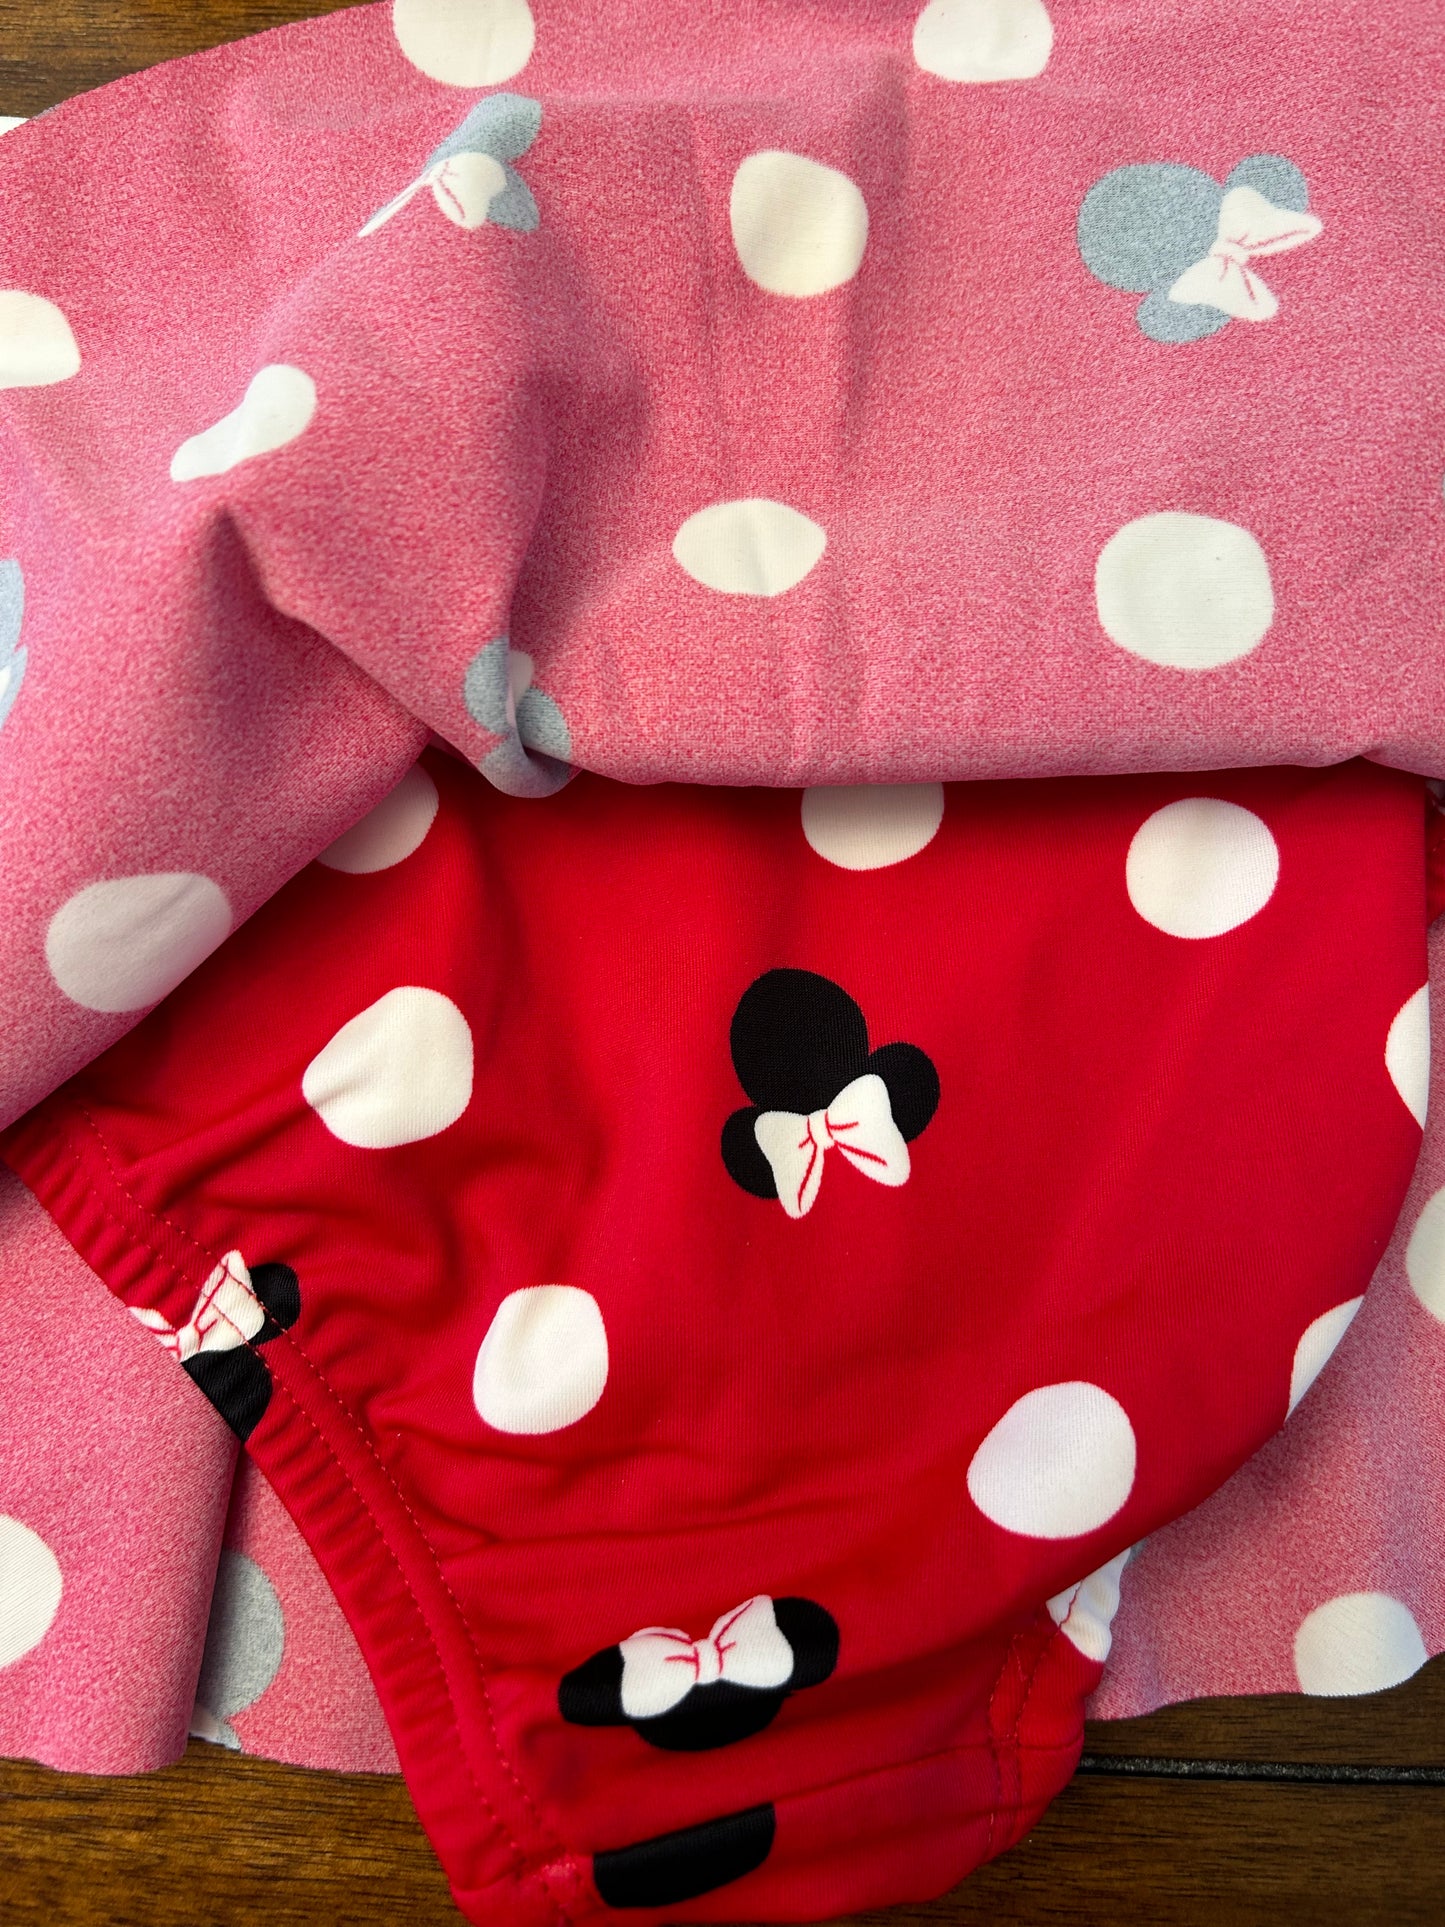 Disney Girls Bright Red Hanna Andersson Minnie Mouse Two Piece Swimsuit Set NWOT Size 4 PPU 45040